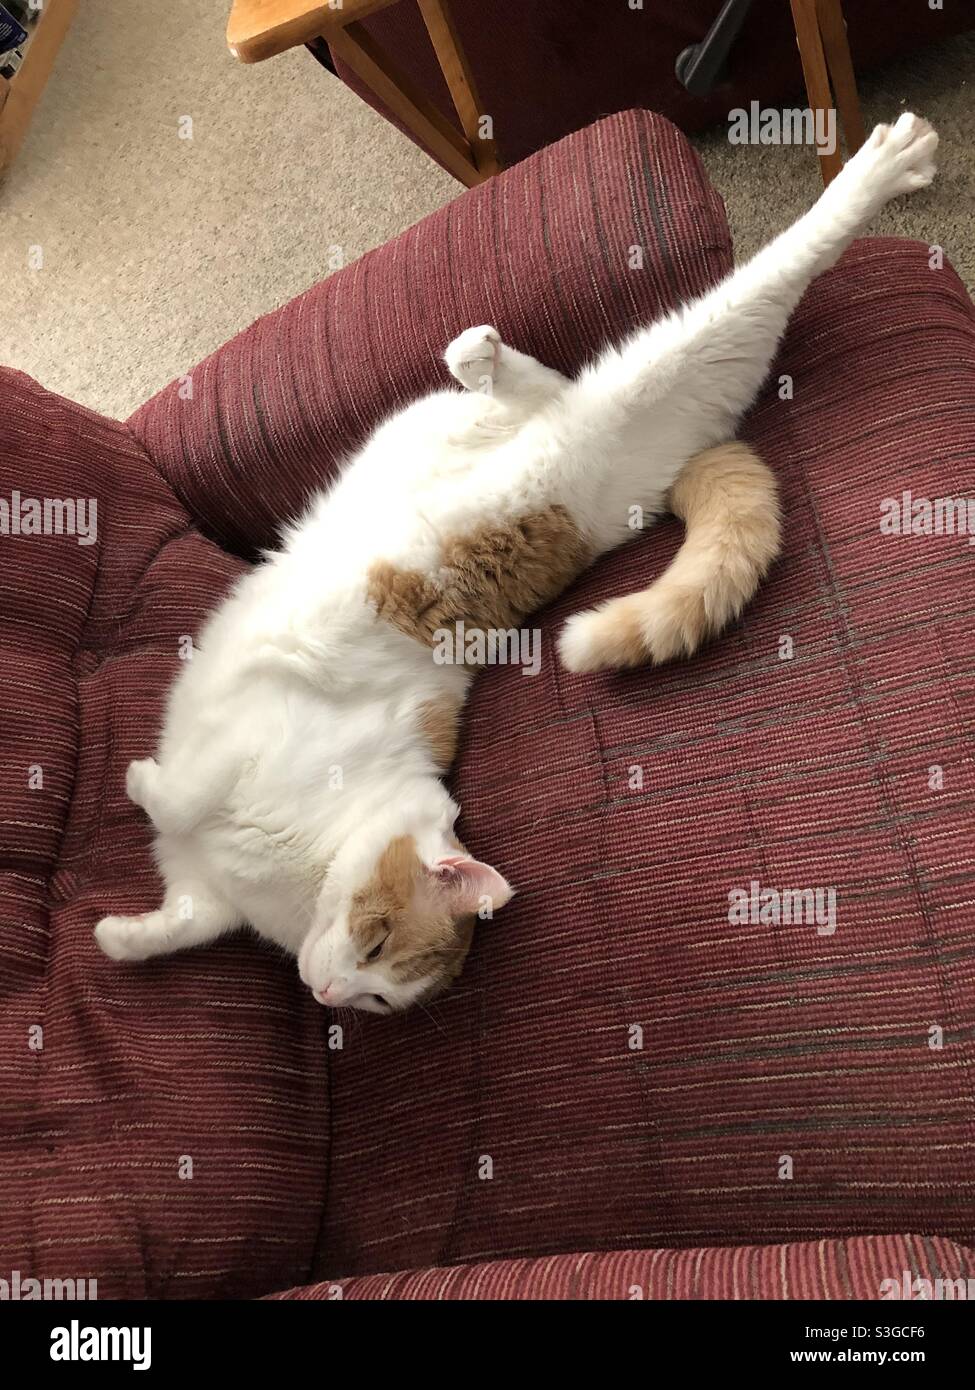 Cat stretching his long body while napping in a recliner Stock Photo